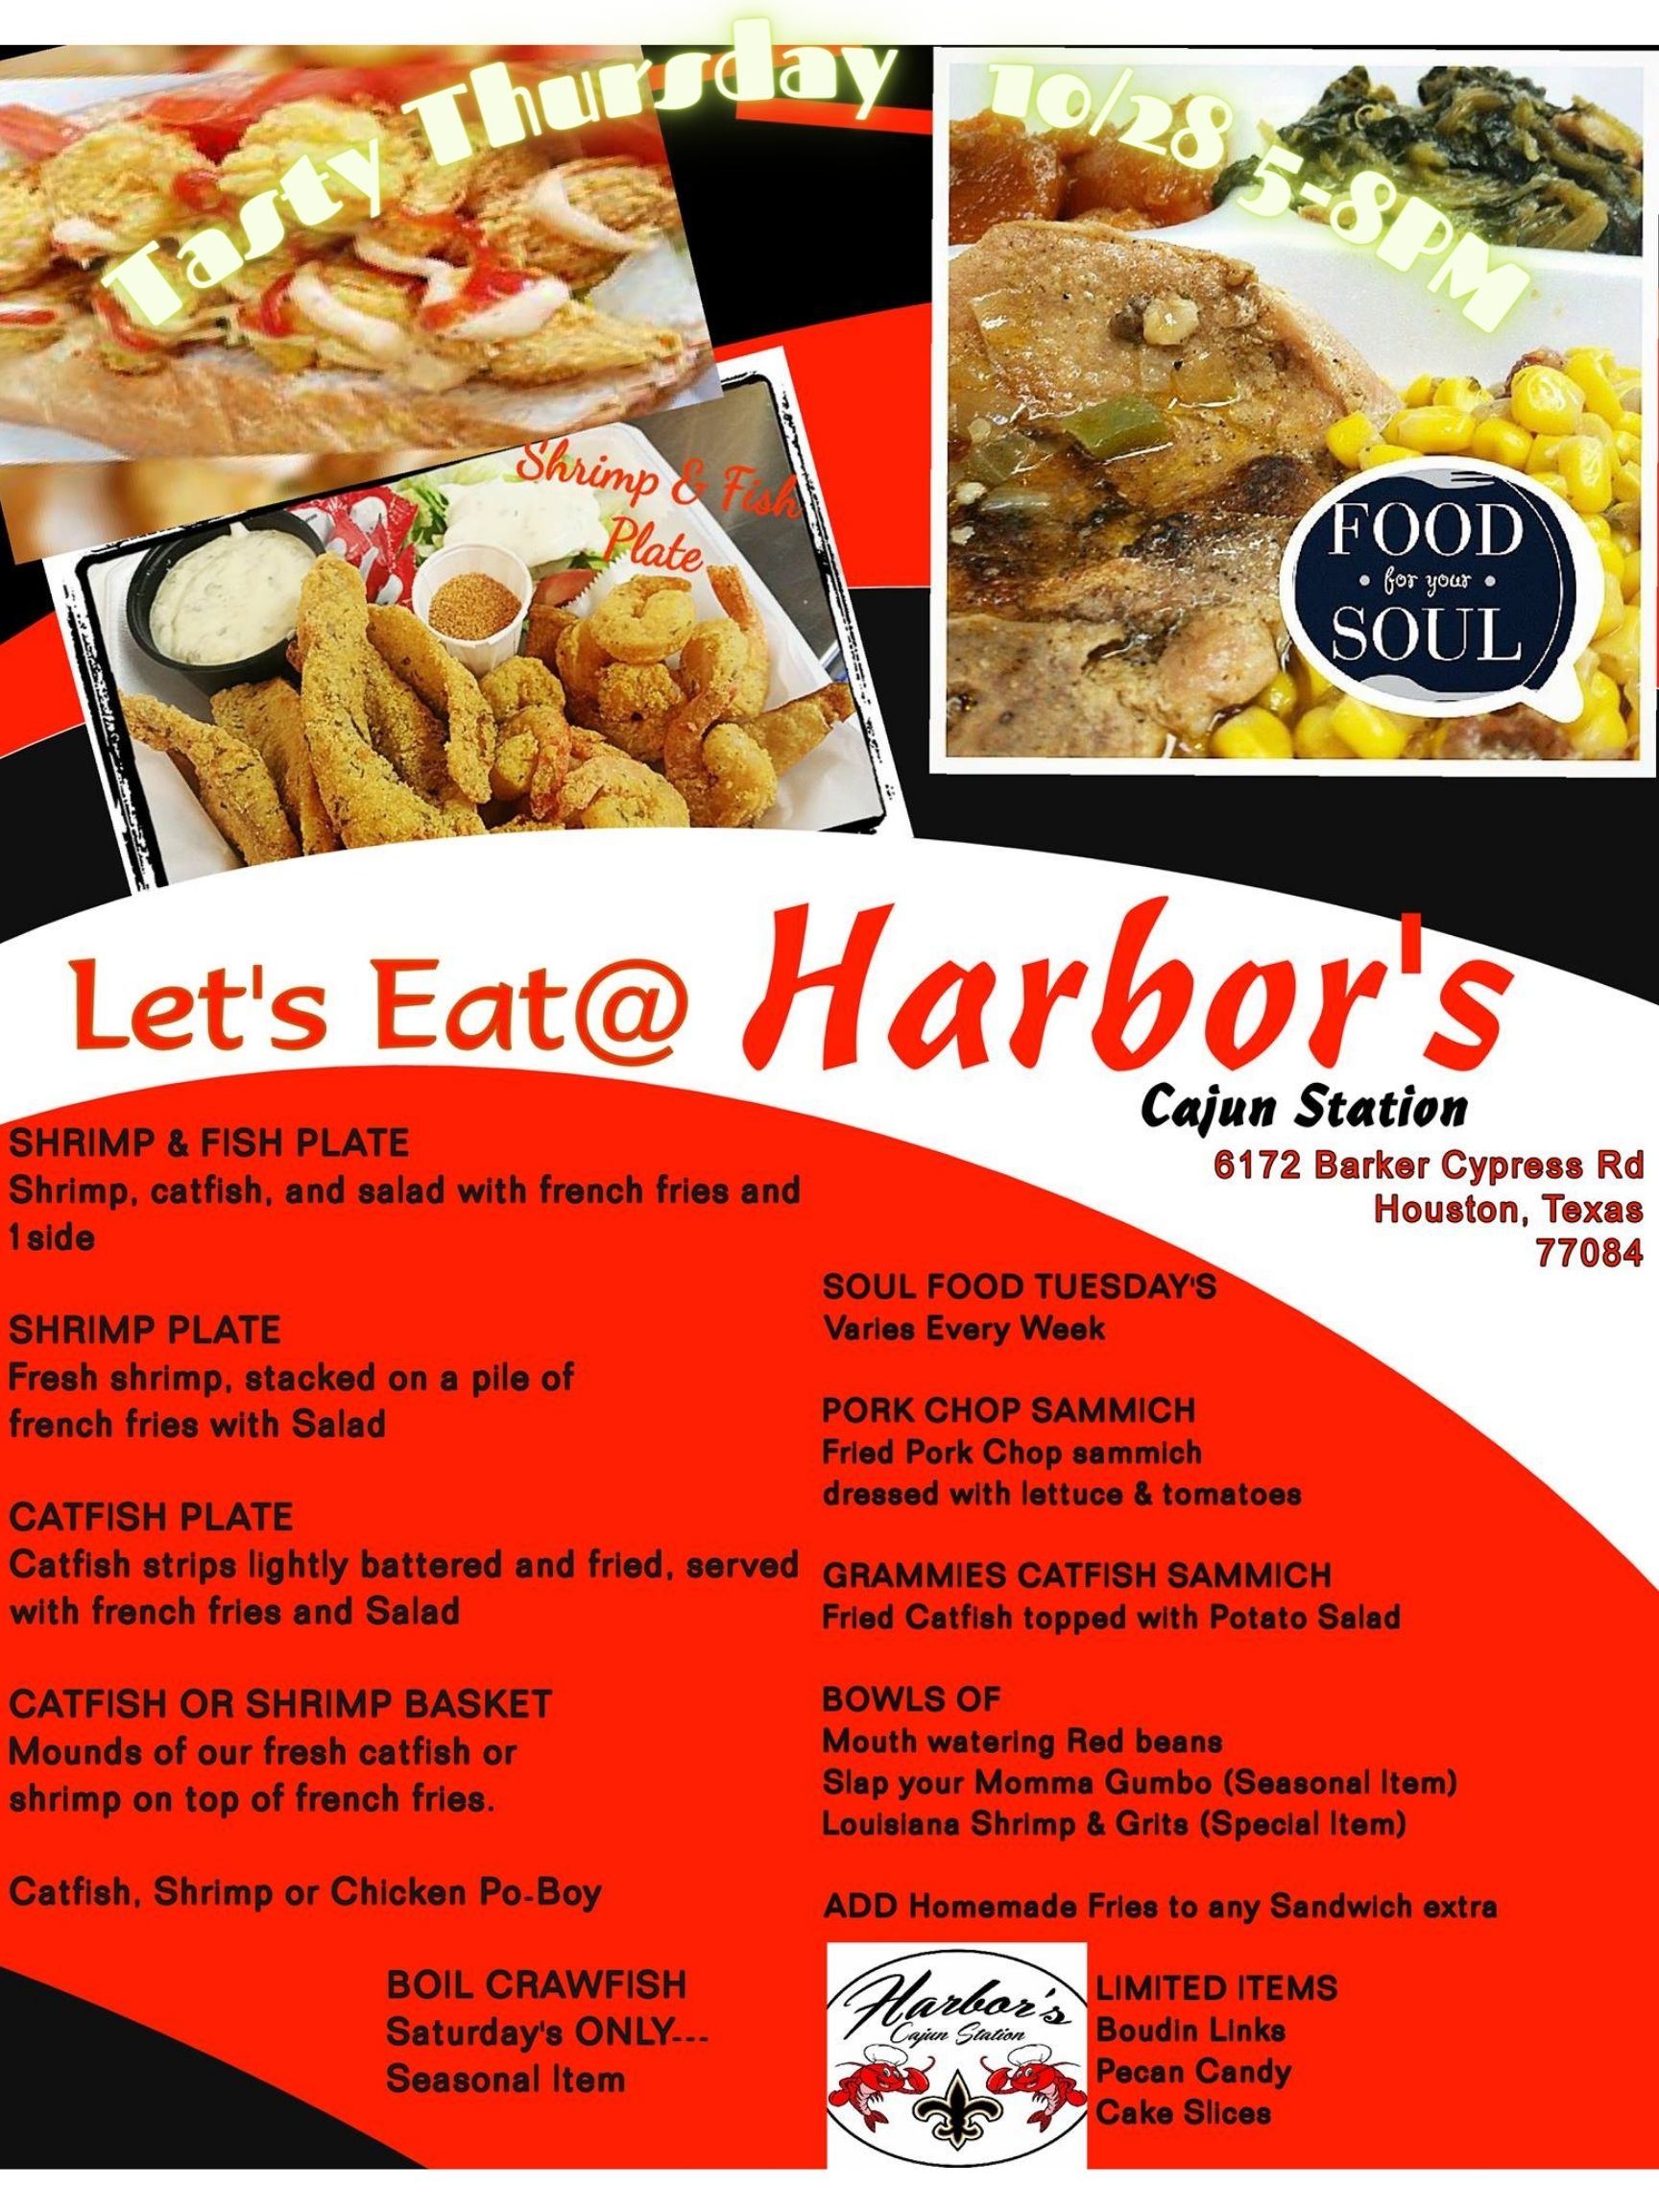 Apartments in Spring Let's eat at Harbor's, conveniently located near apartments in Spring TX. Savannah Oaks Apartments in Spring 21000 Gosling Road Spring, TX 77388  1-833-883-3616